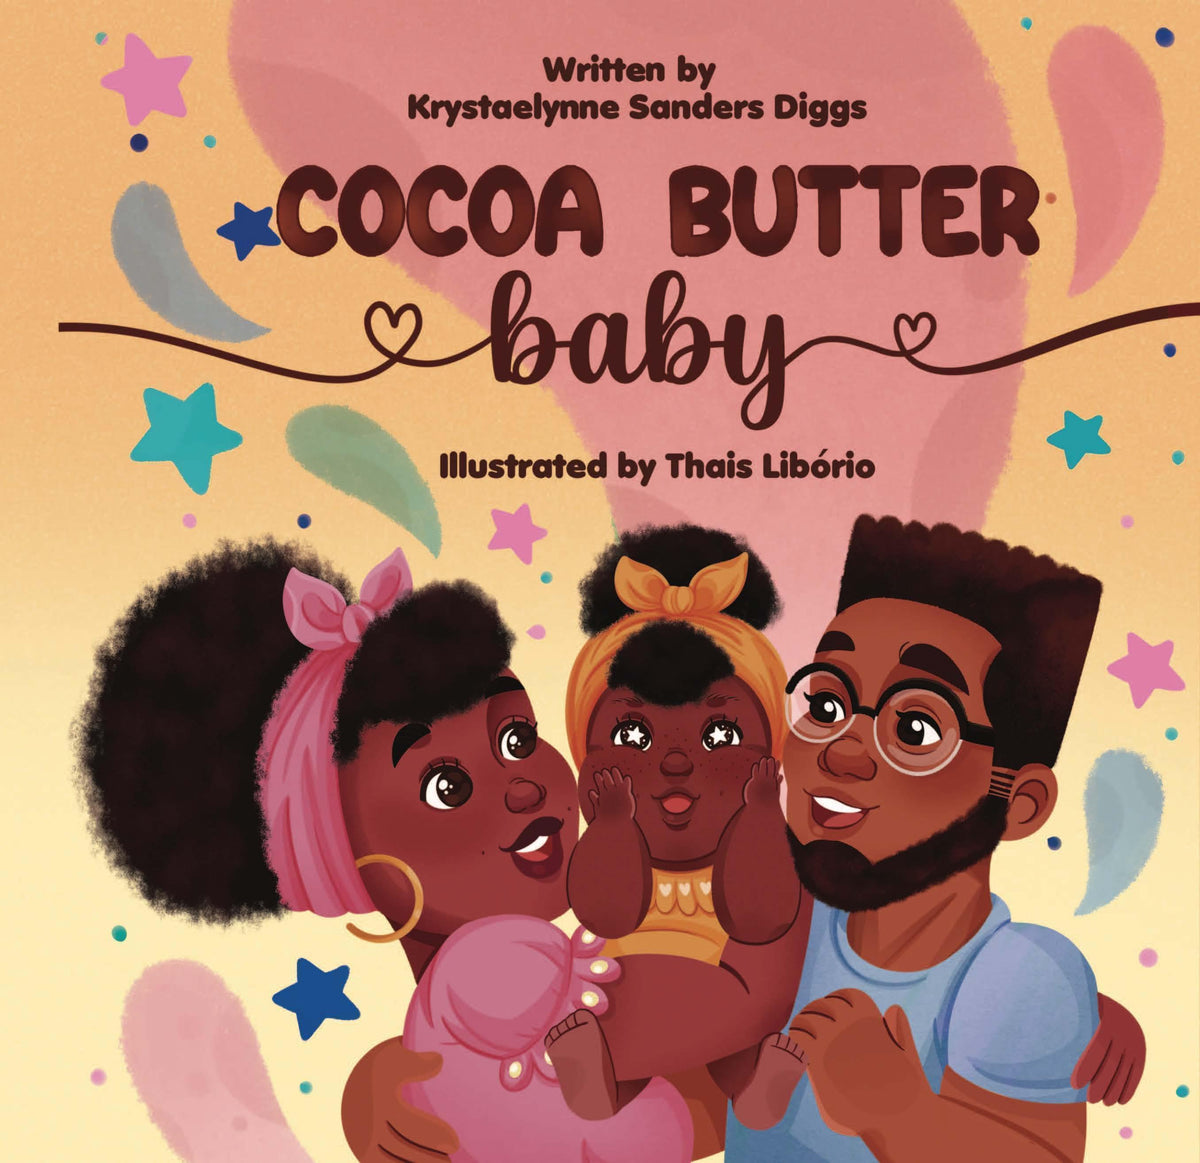 Cocoa Butter Baby - Author Krystaelynne Sanders Diggs [Body Safety]